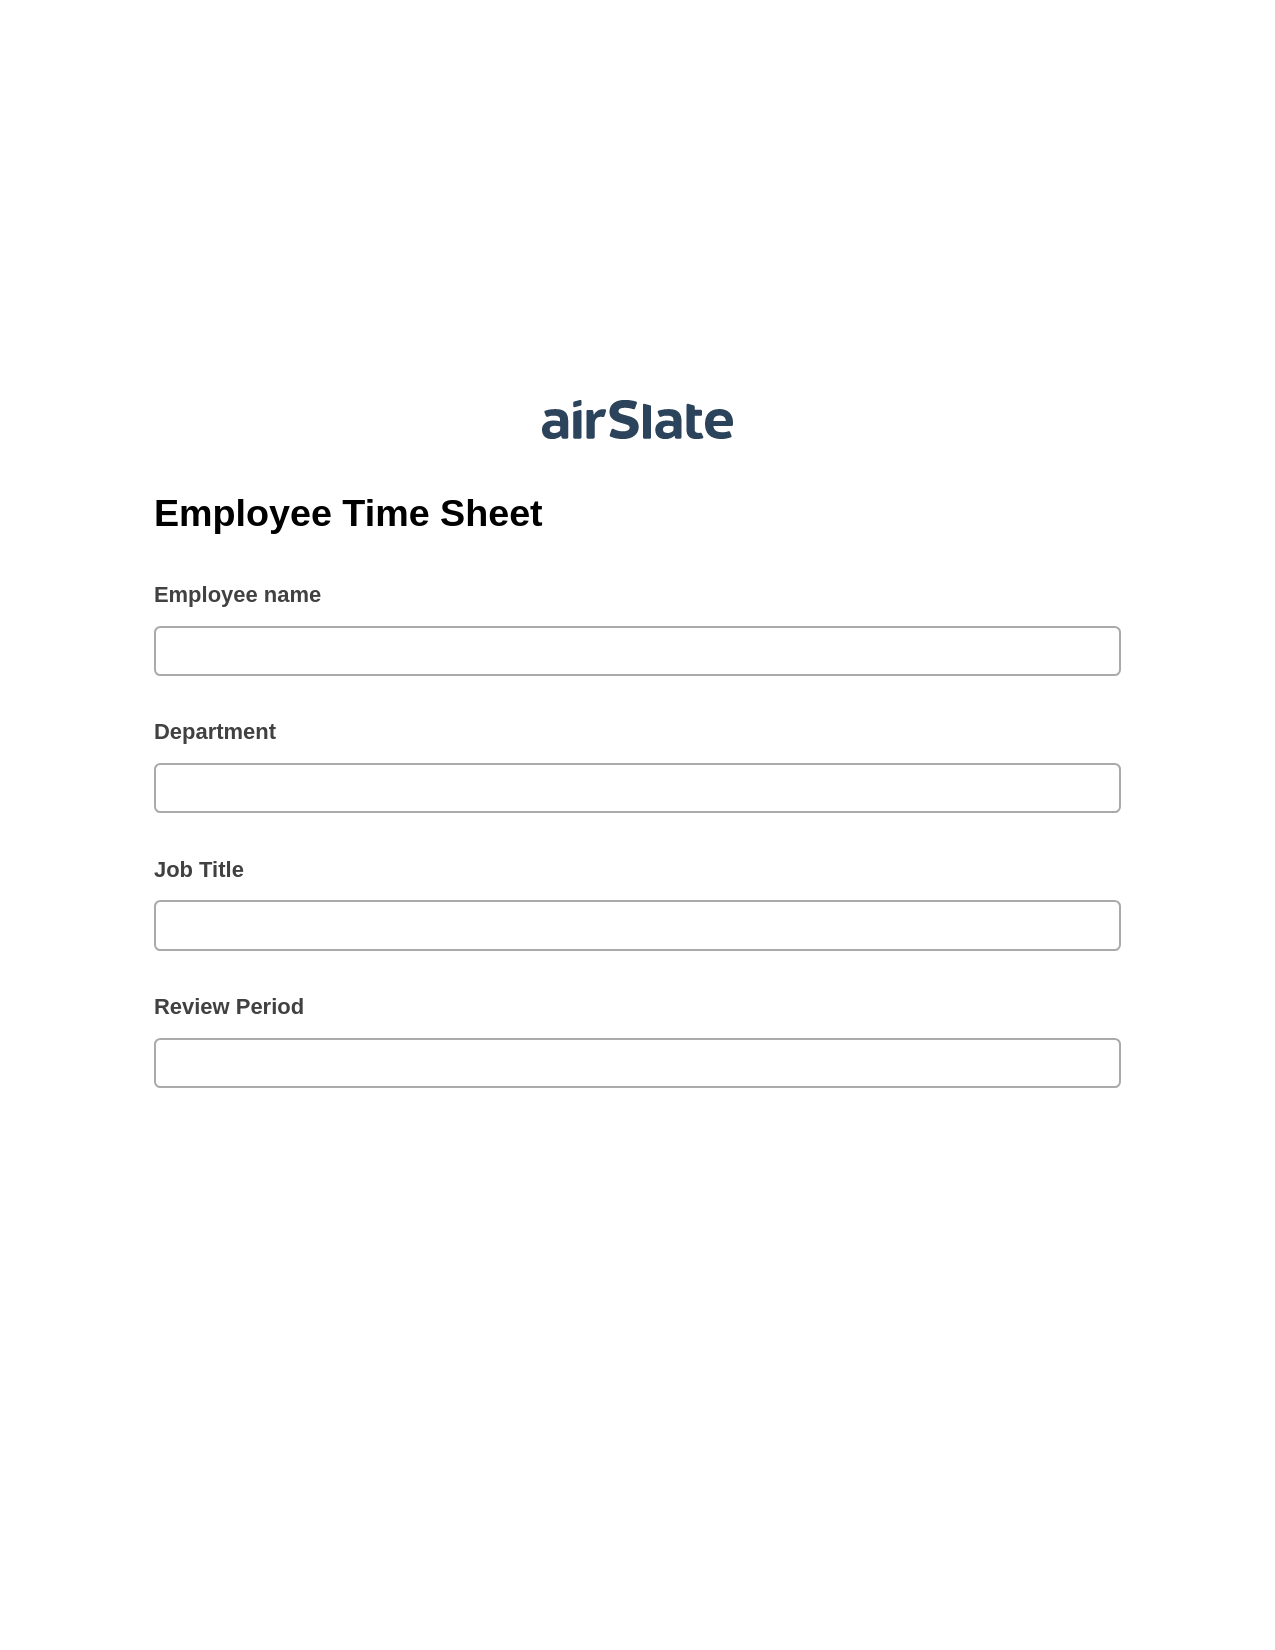 Multirole Employee Time Sheet Pre-fill Dropdowns from Google Sheet Bot, Assign Roles to Recipients Bot, Export to Excel 365 Bot